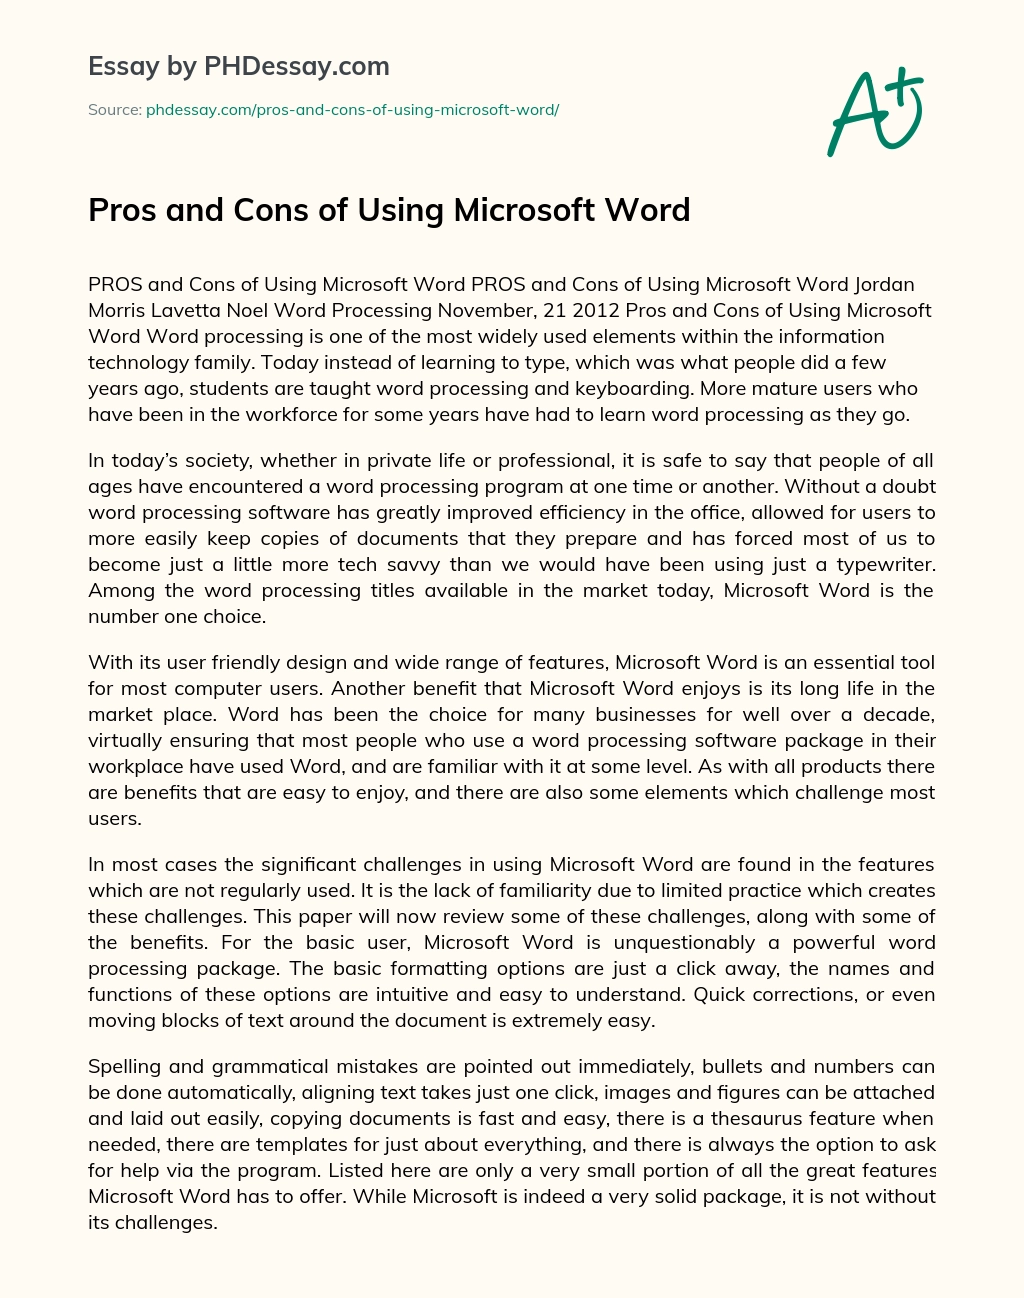 Pros and Cons of Using Microsoft Word essay